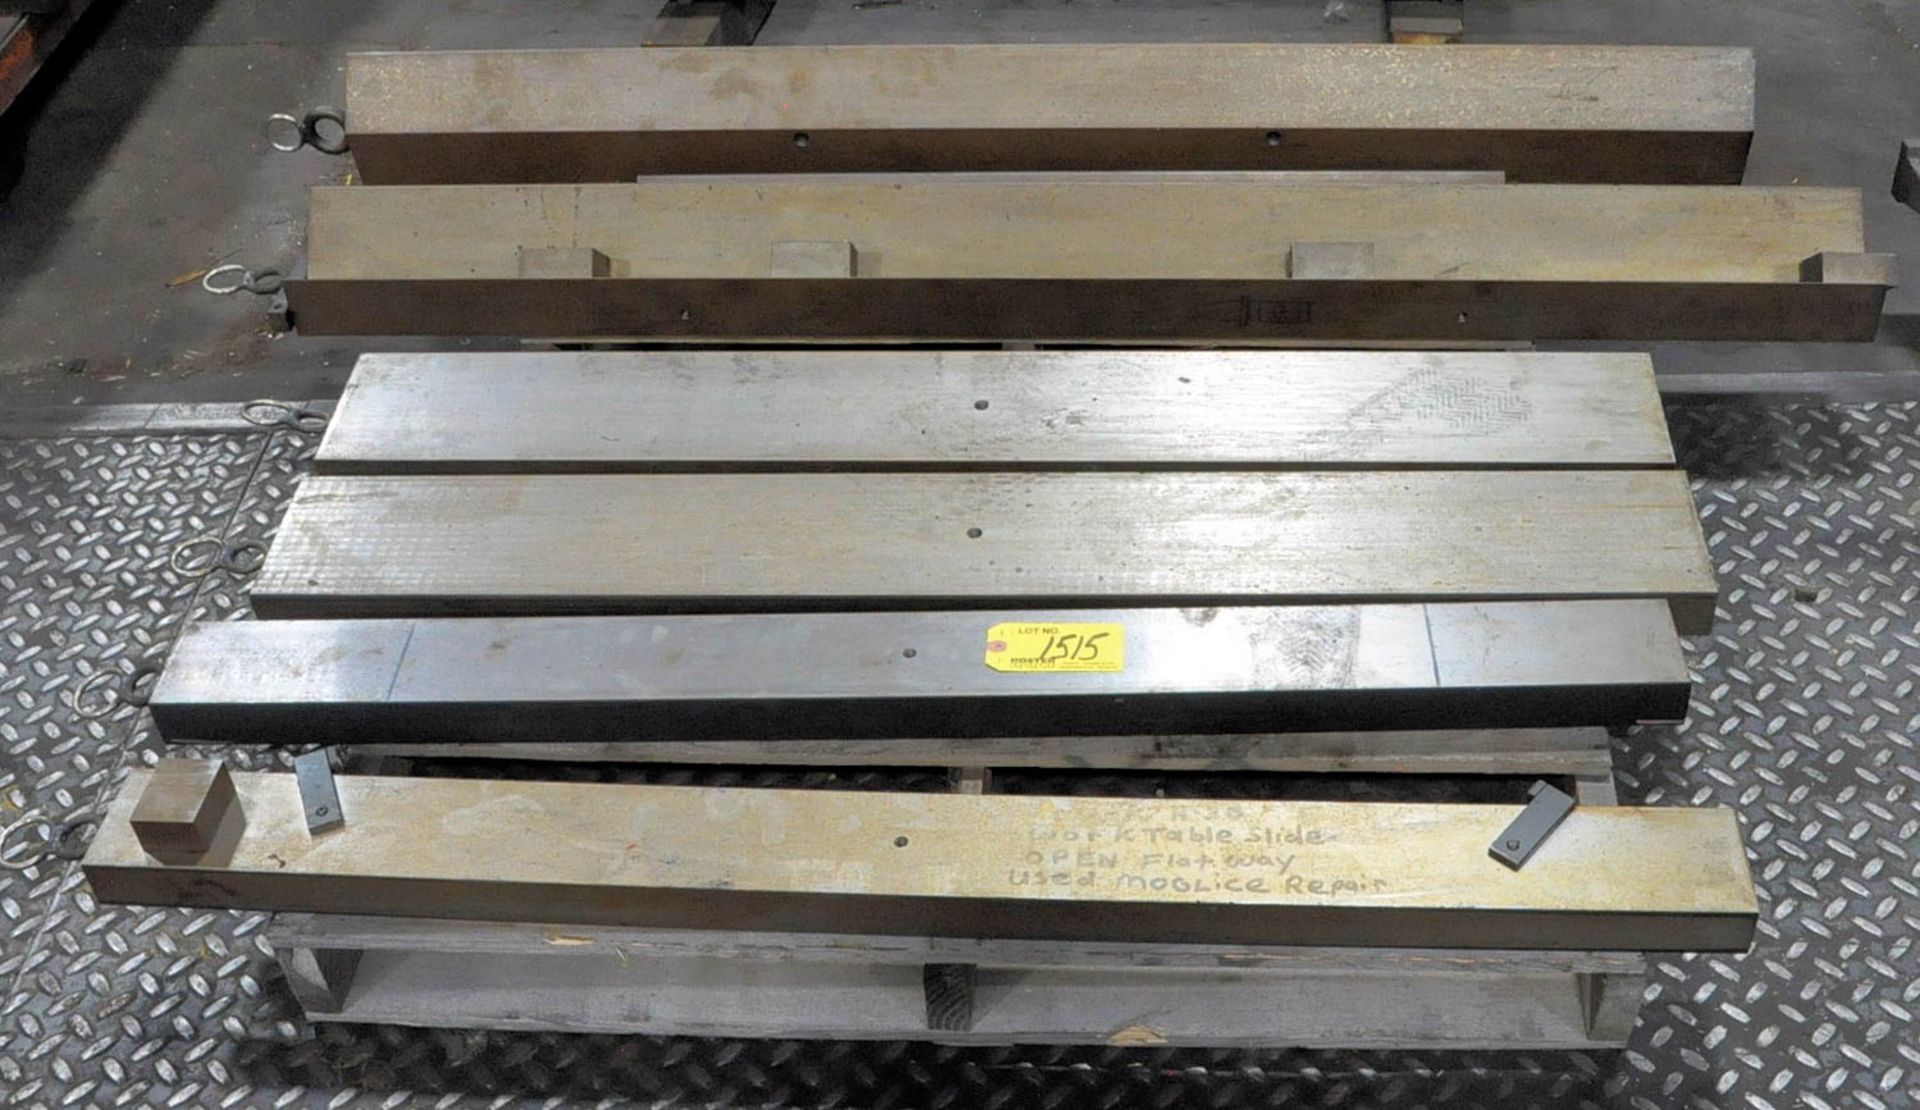 (2) PAIRS 48" PARALLEL BARS & (3) VARIOUS V-TYPE BARS ON (1) PALLET & (2) 53 3/4" PARALLEL BARS, (